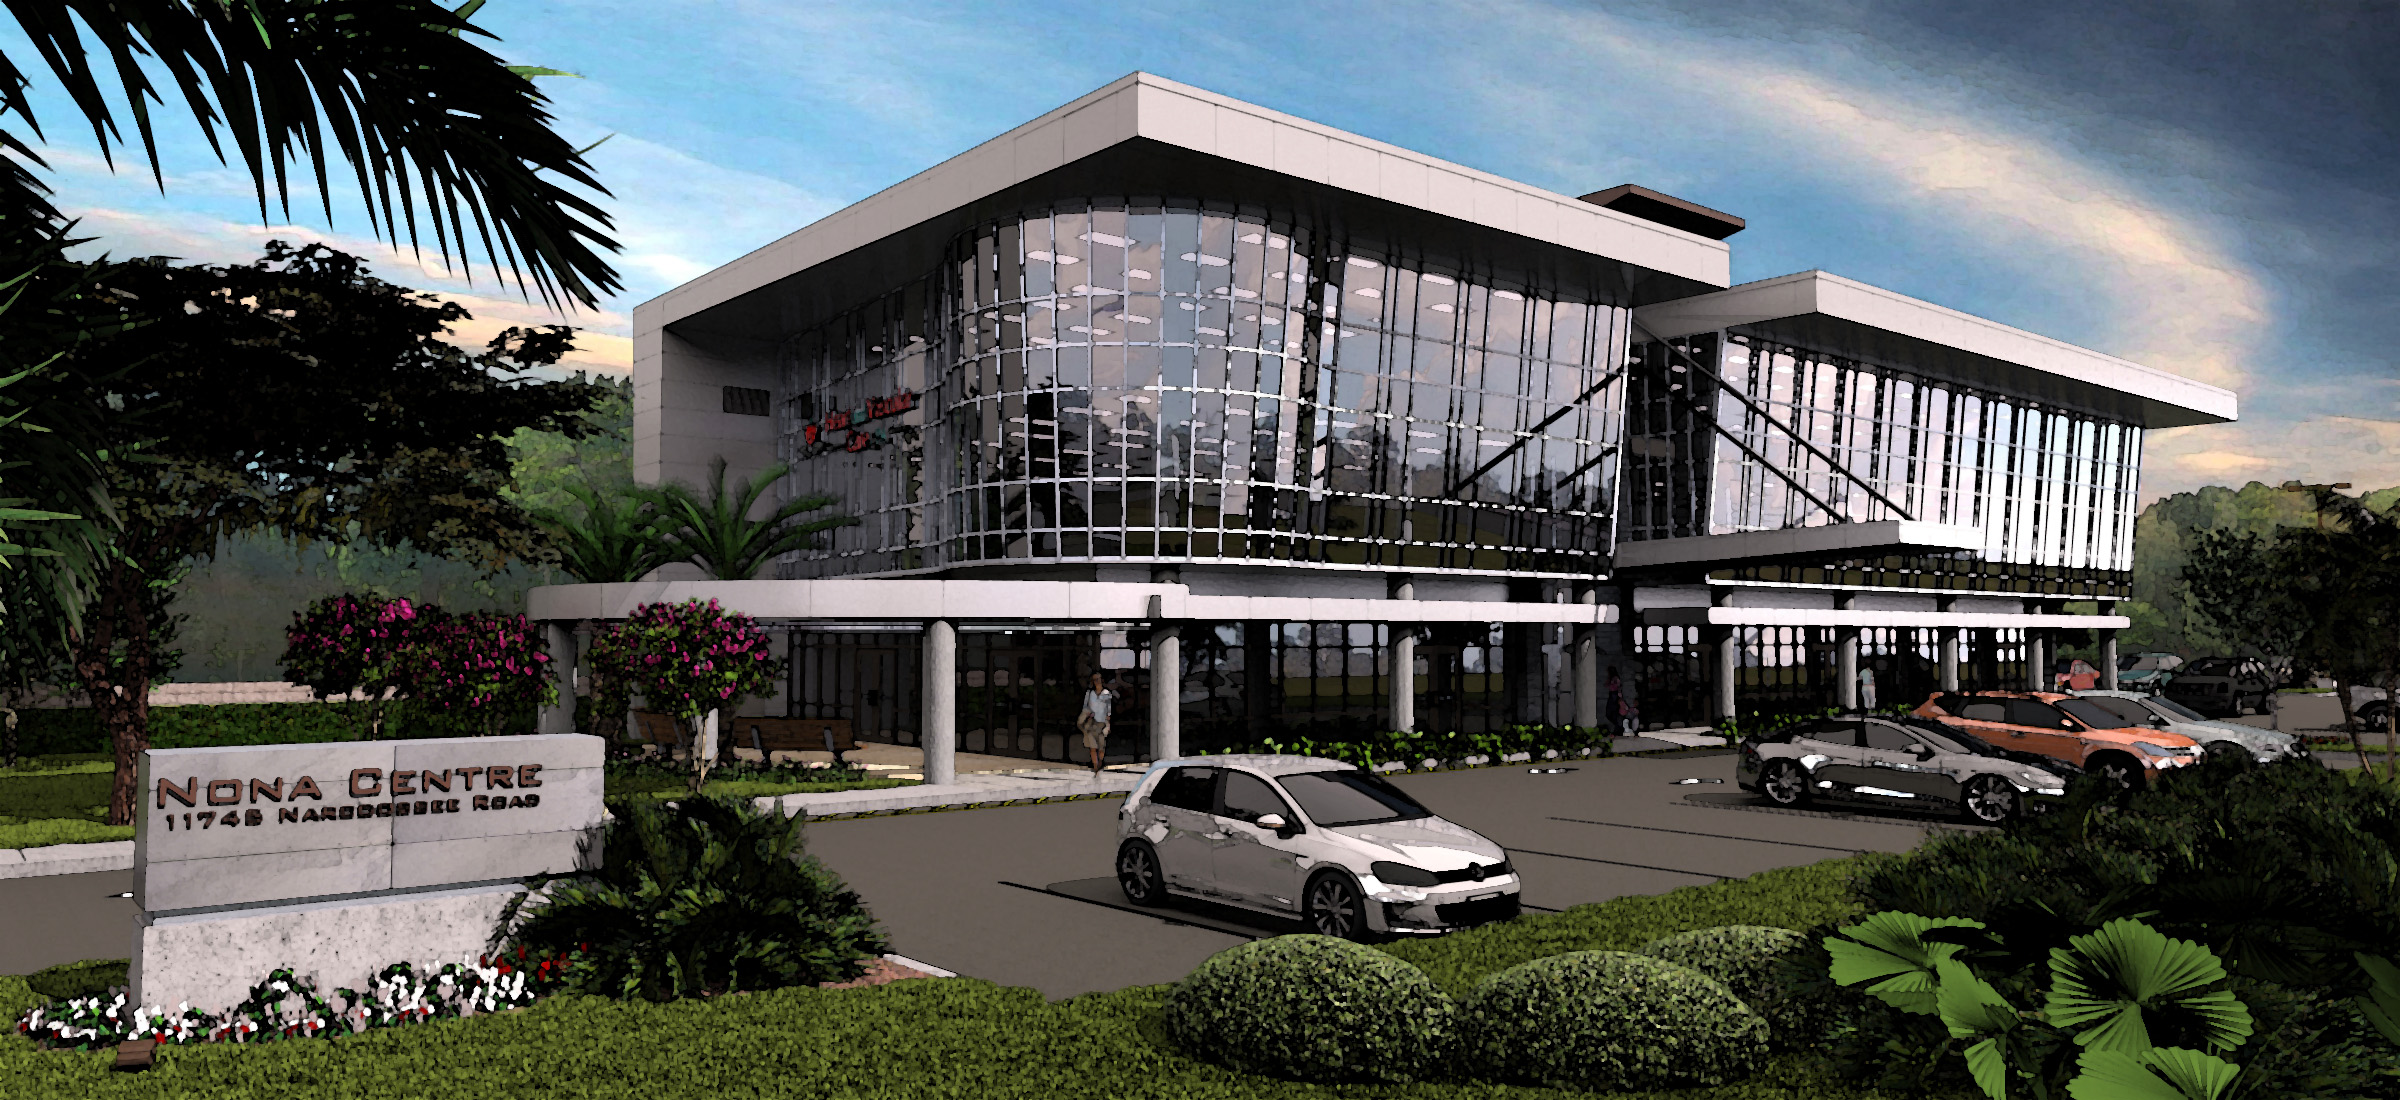 Orlando-Based Company Wins Contract for a 3-story project in Lake Nona